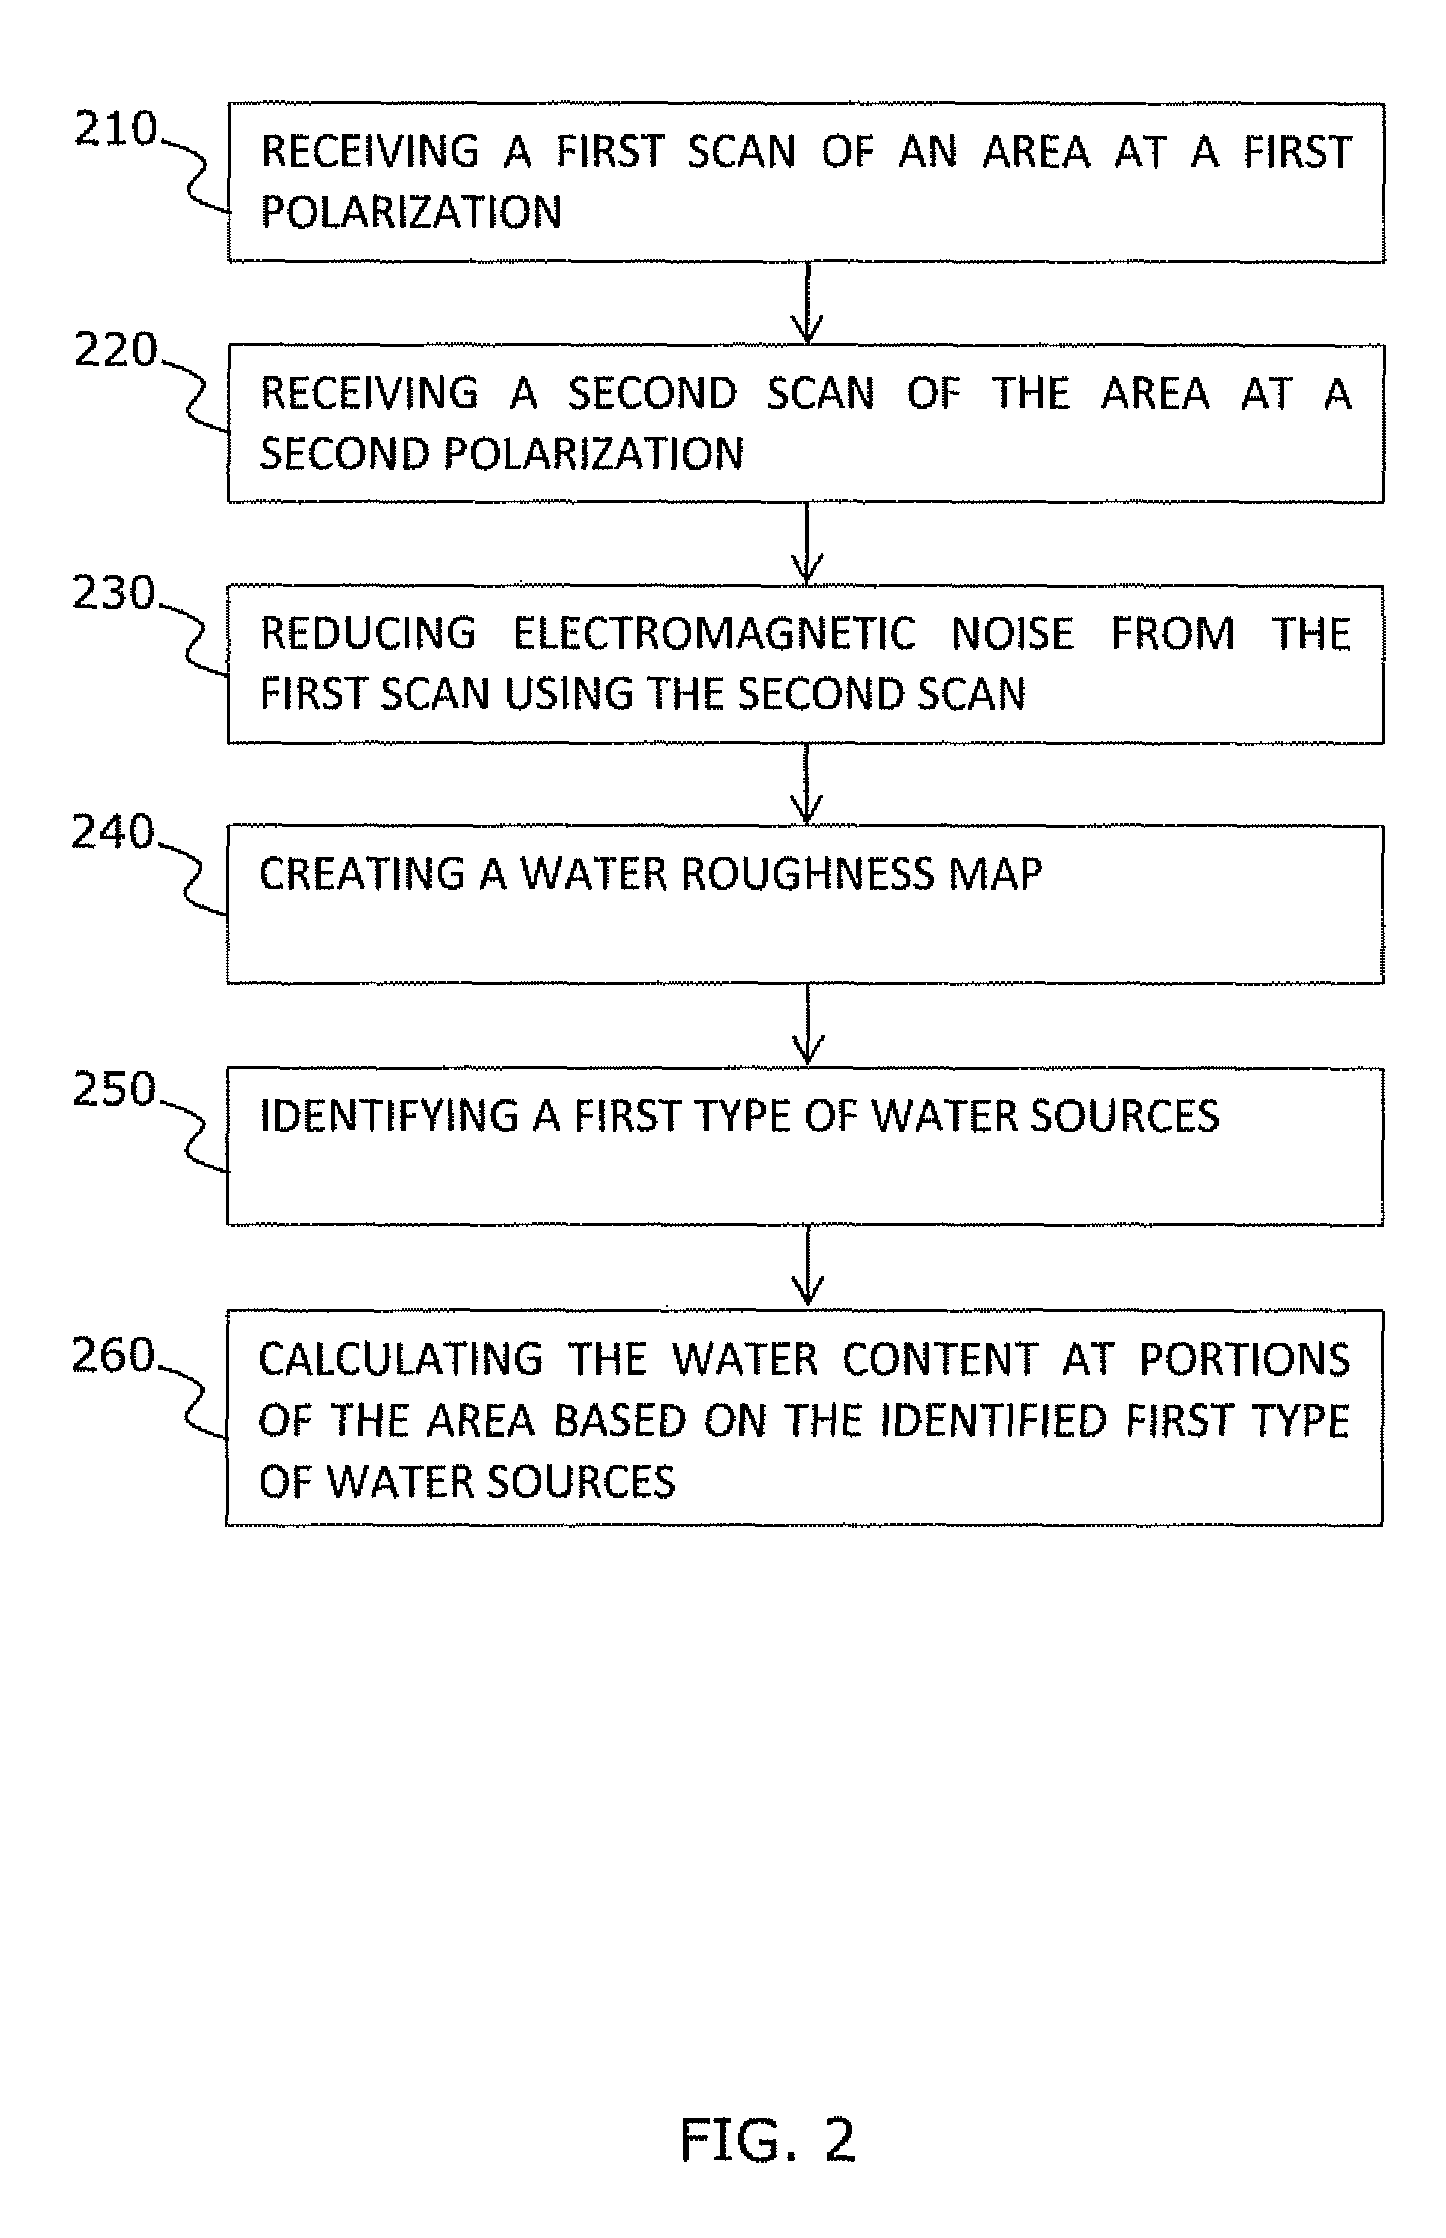 System and method of underground water detection